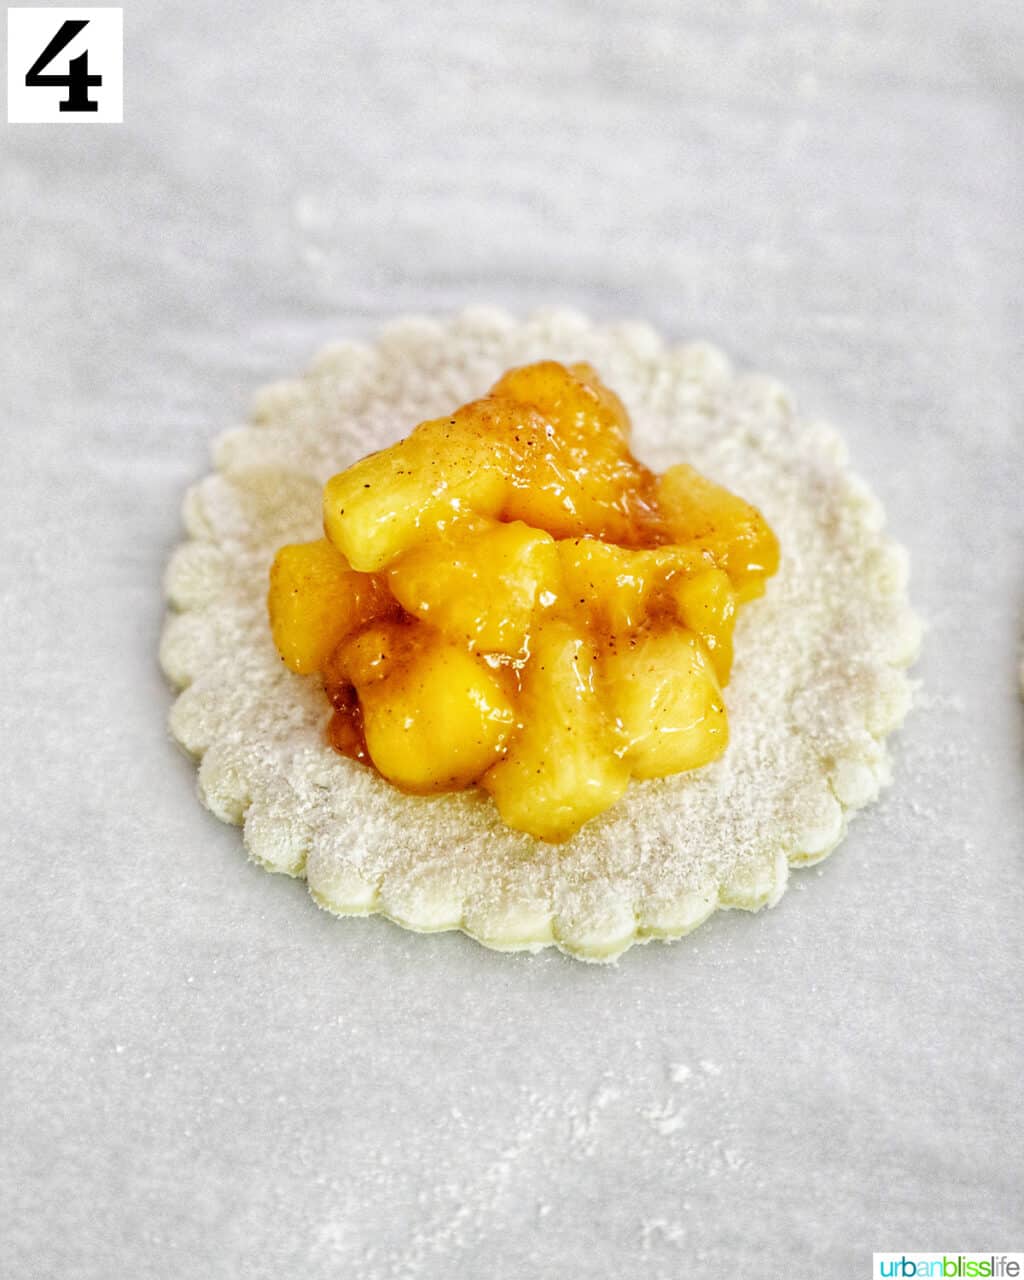 diced peaches and mango in the center of a round puff pastry dough.